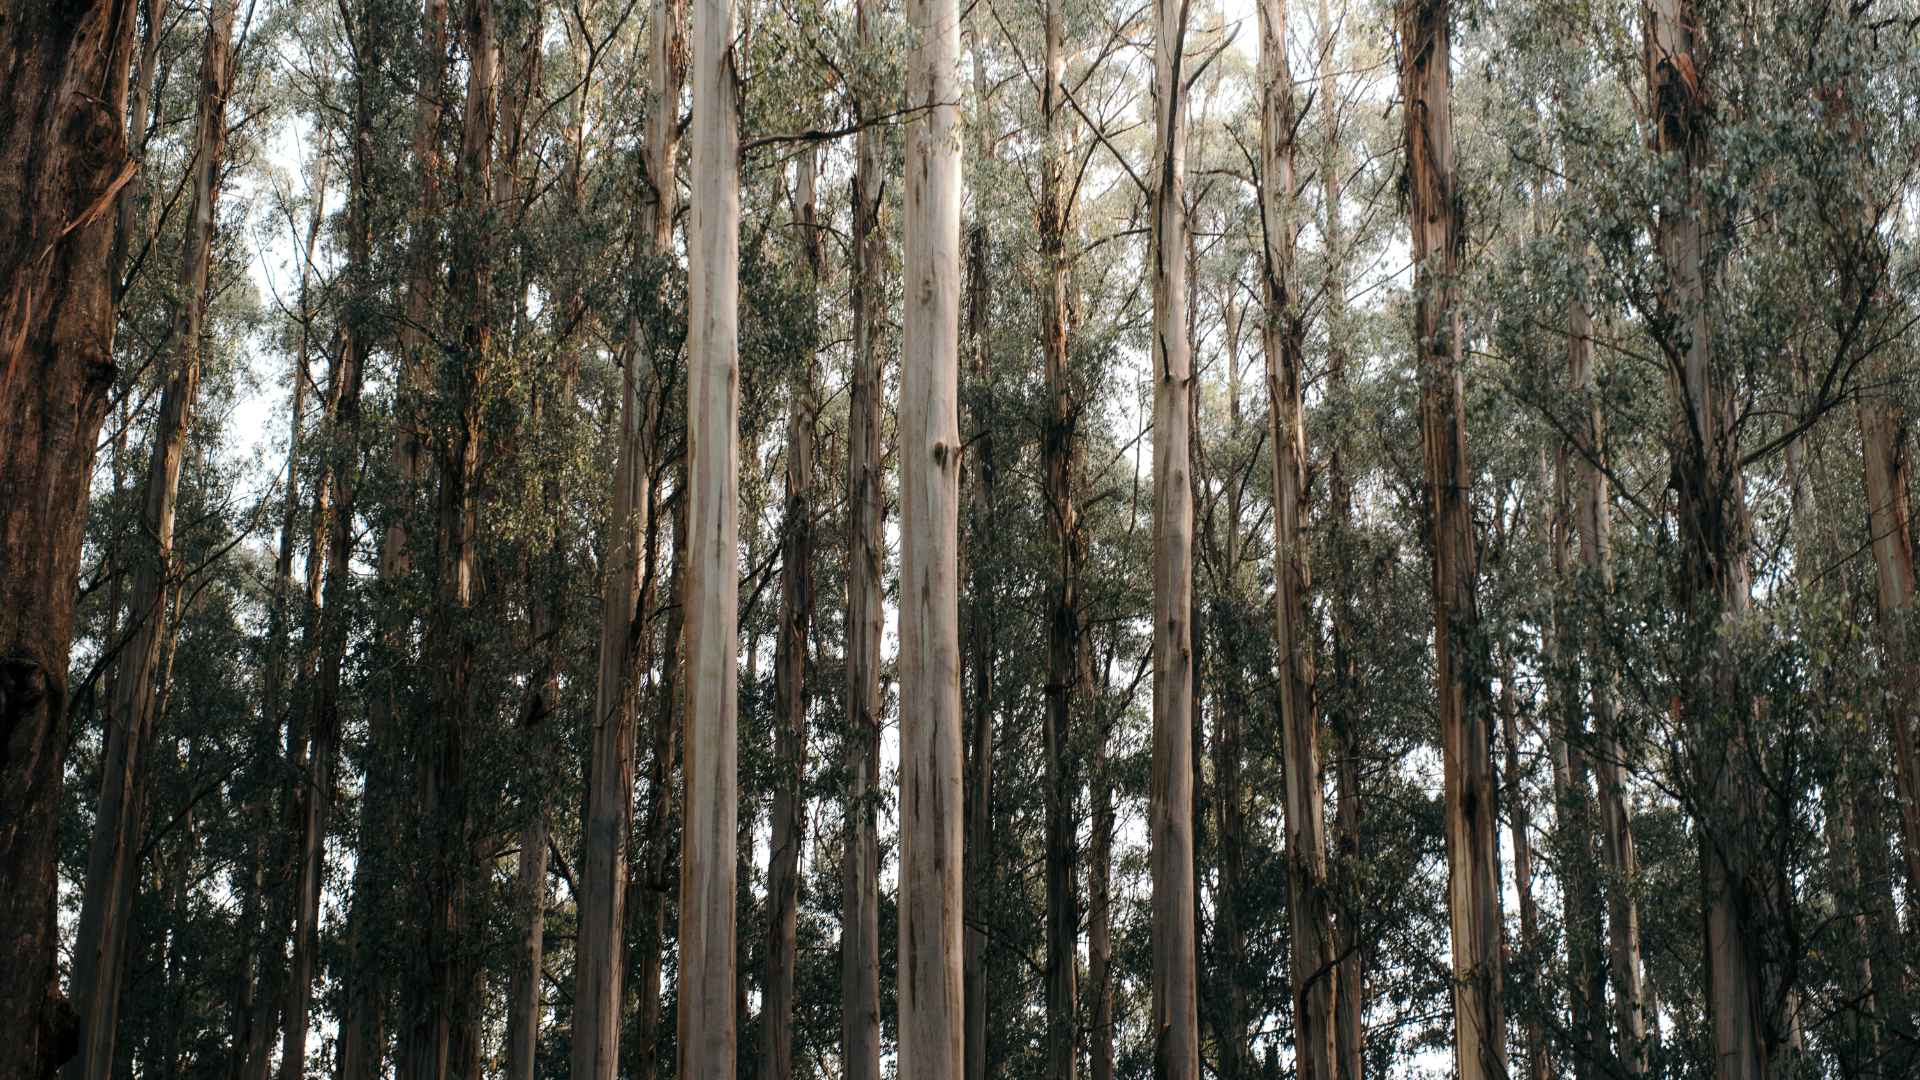 Trees in the Dandenong Ranges